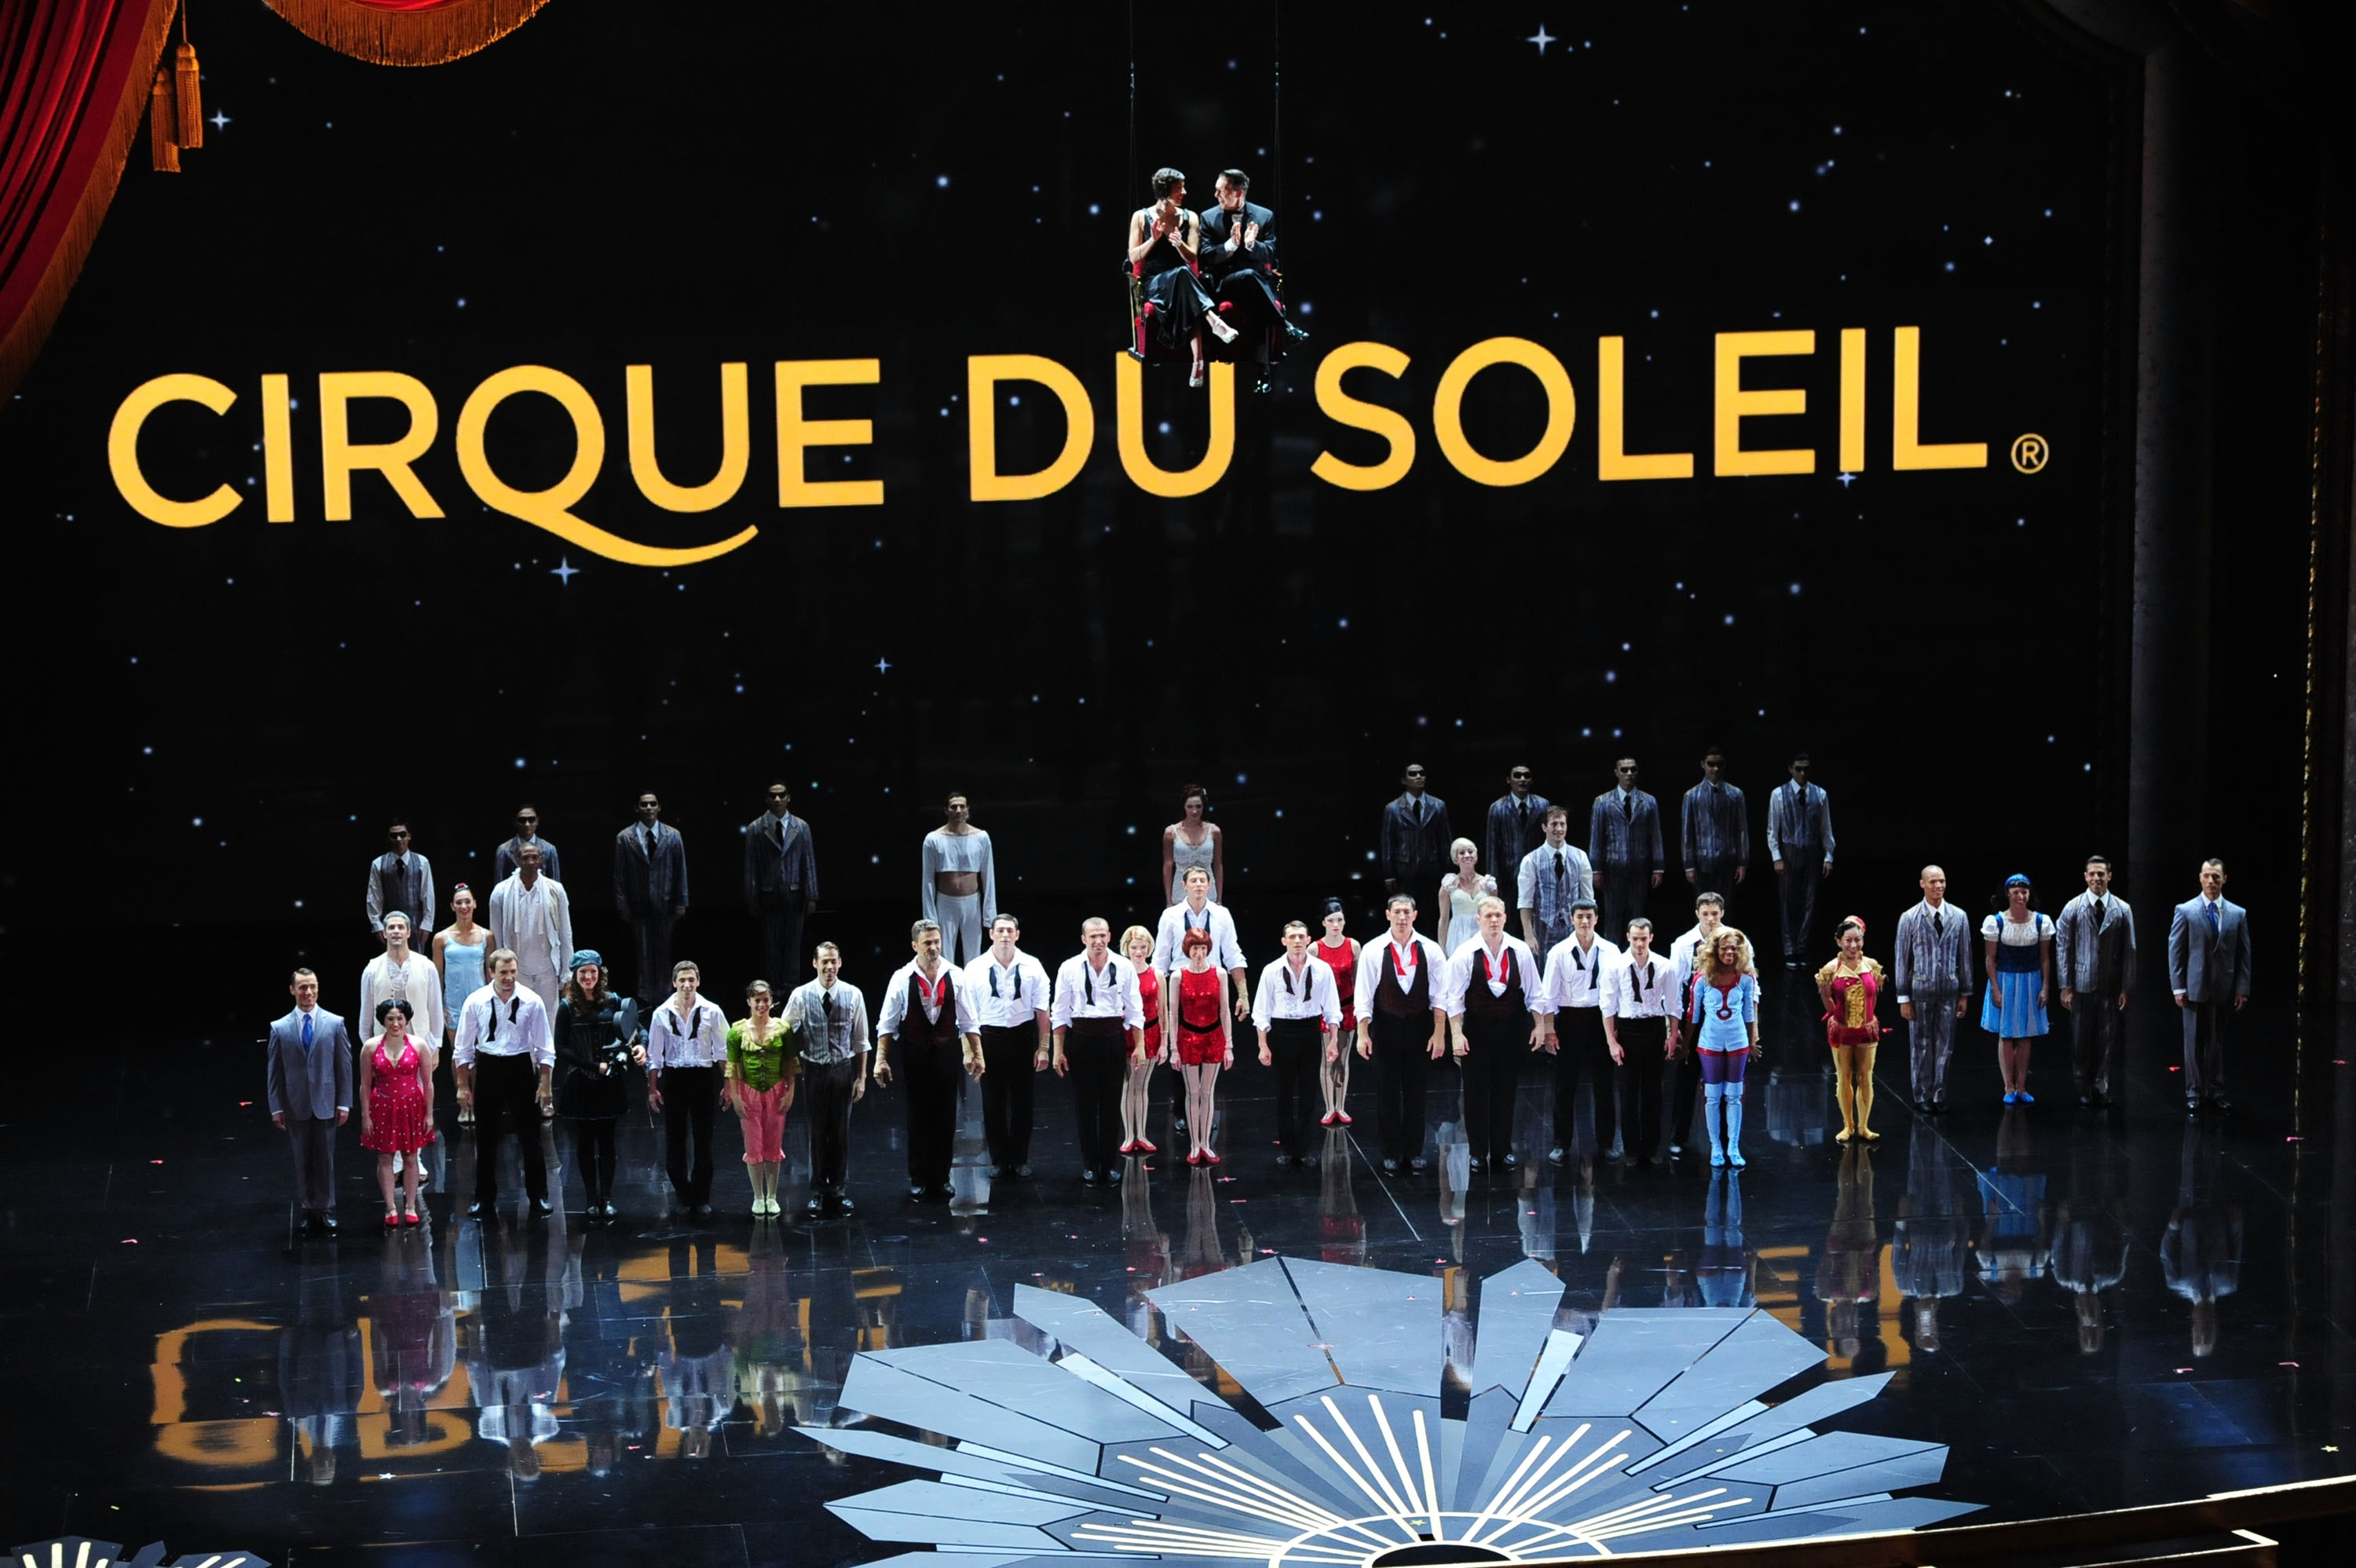 Cirque du Soleil performers at the 2012 Academy Awards.